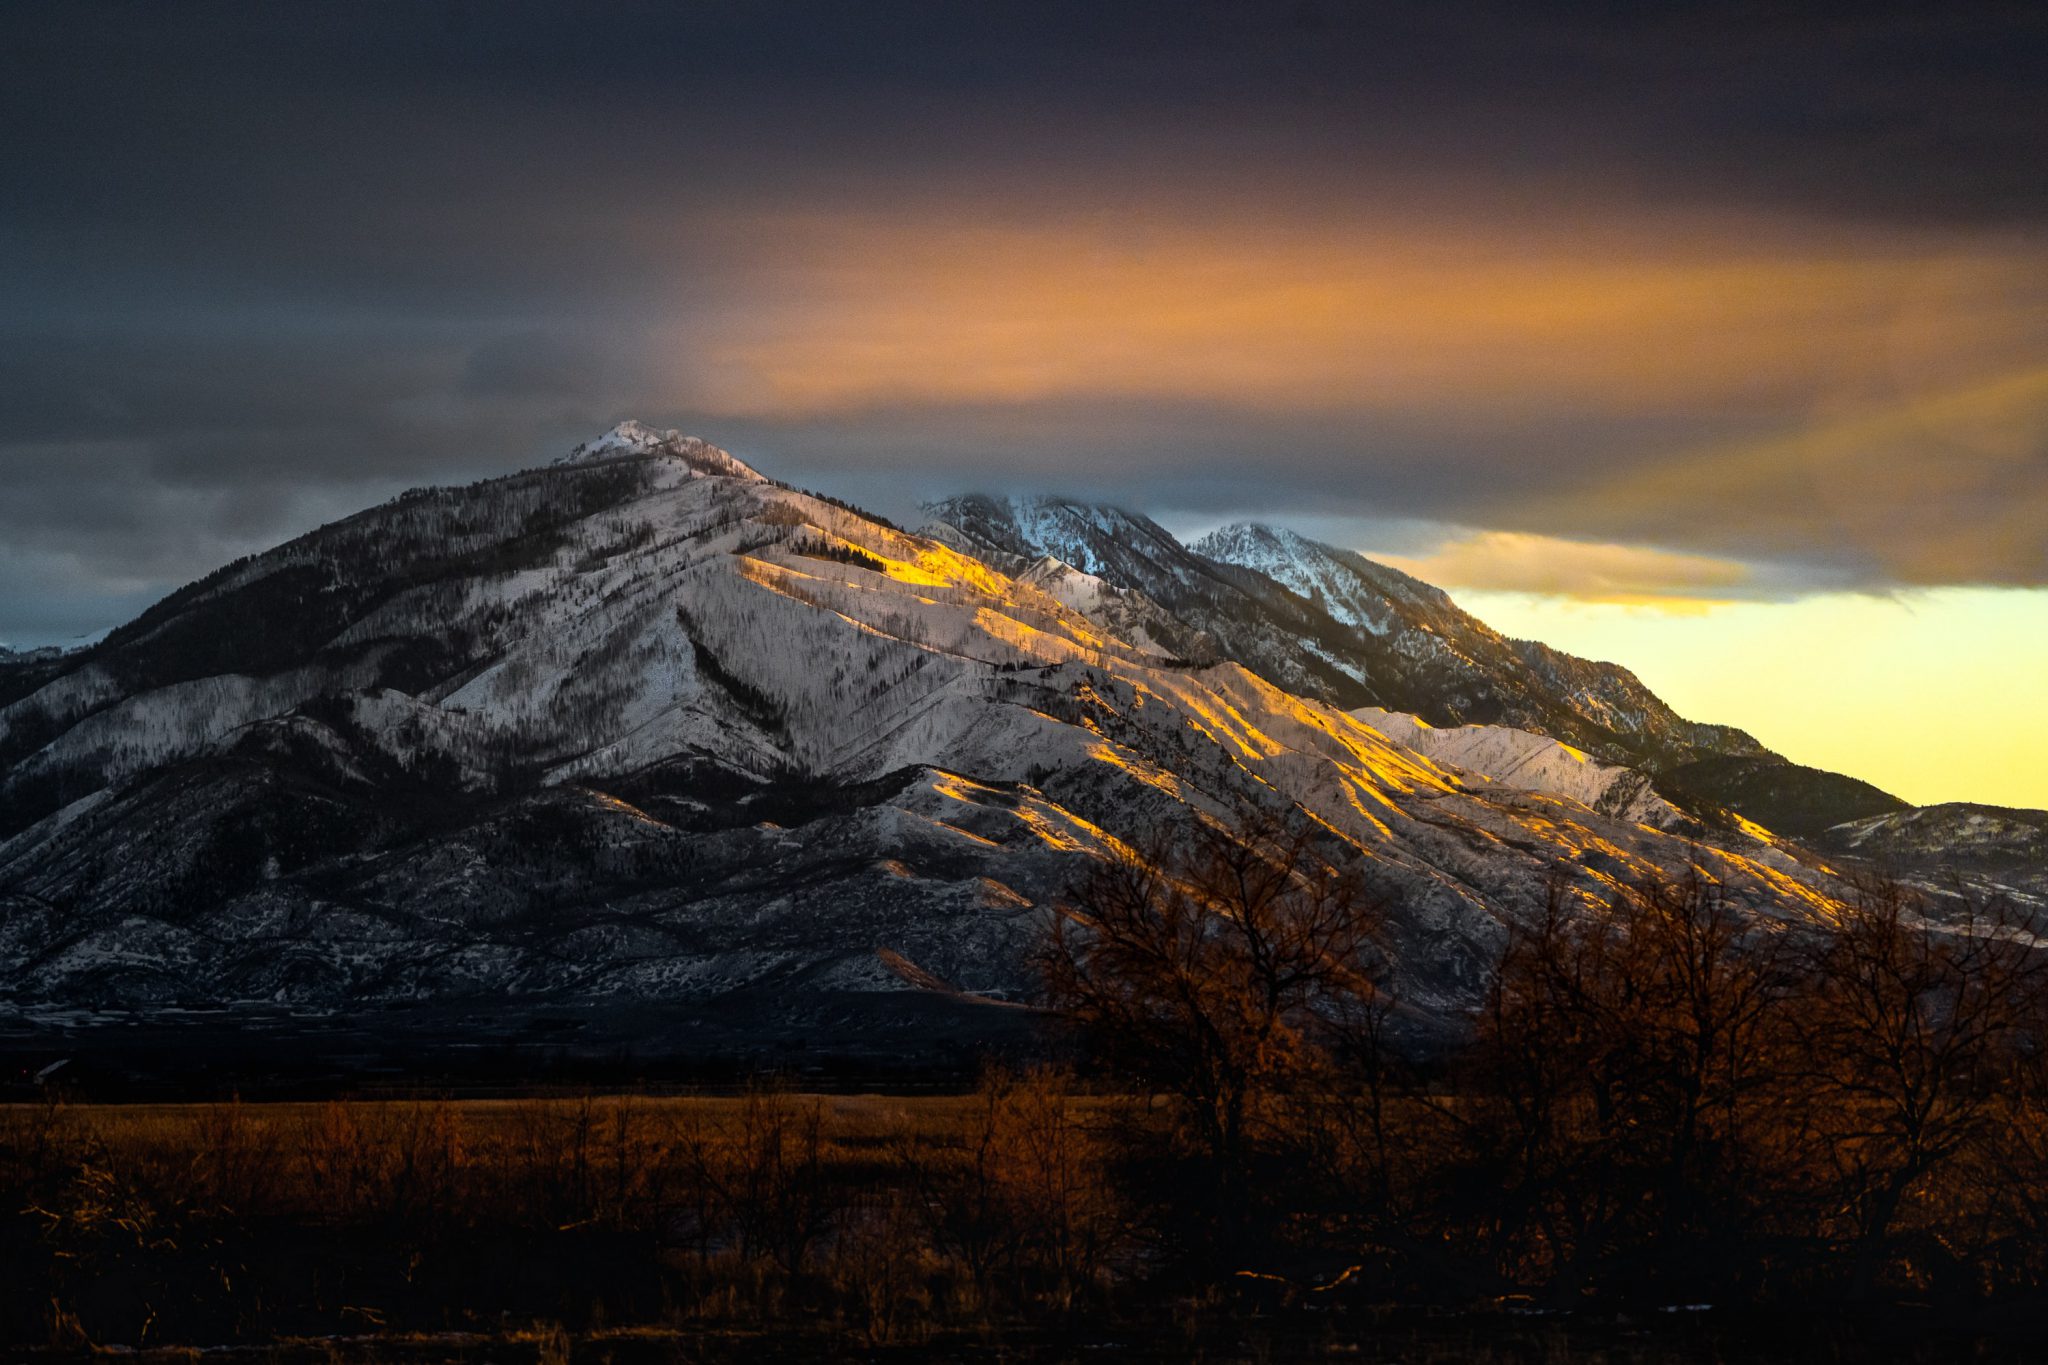 Wasatch Mountains